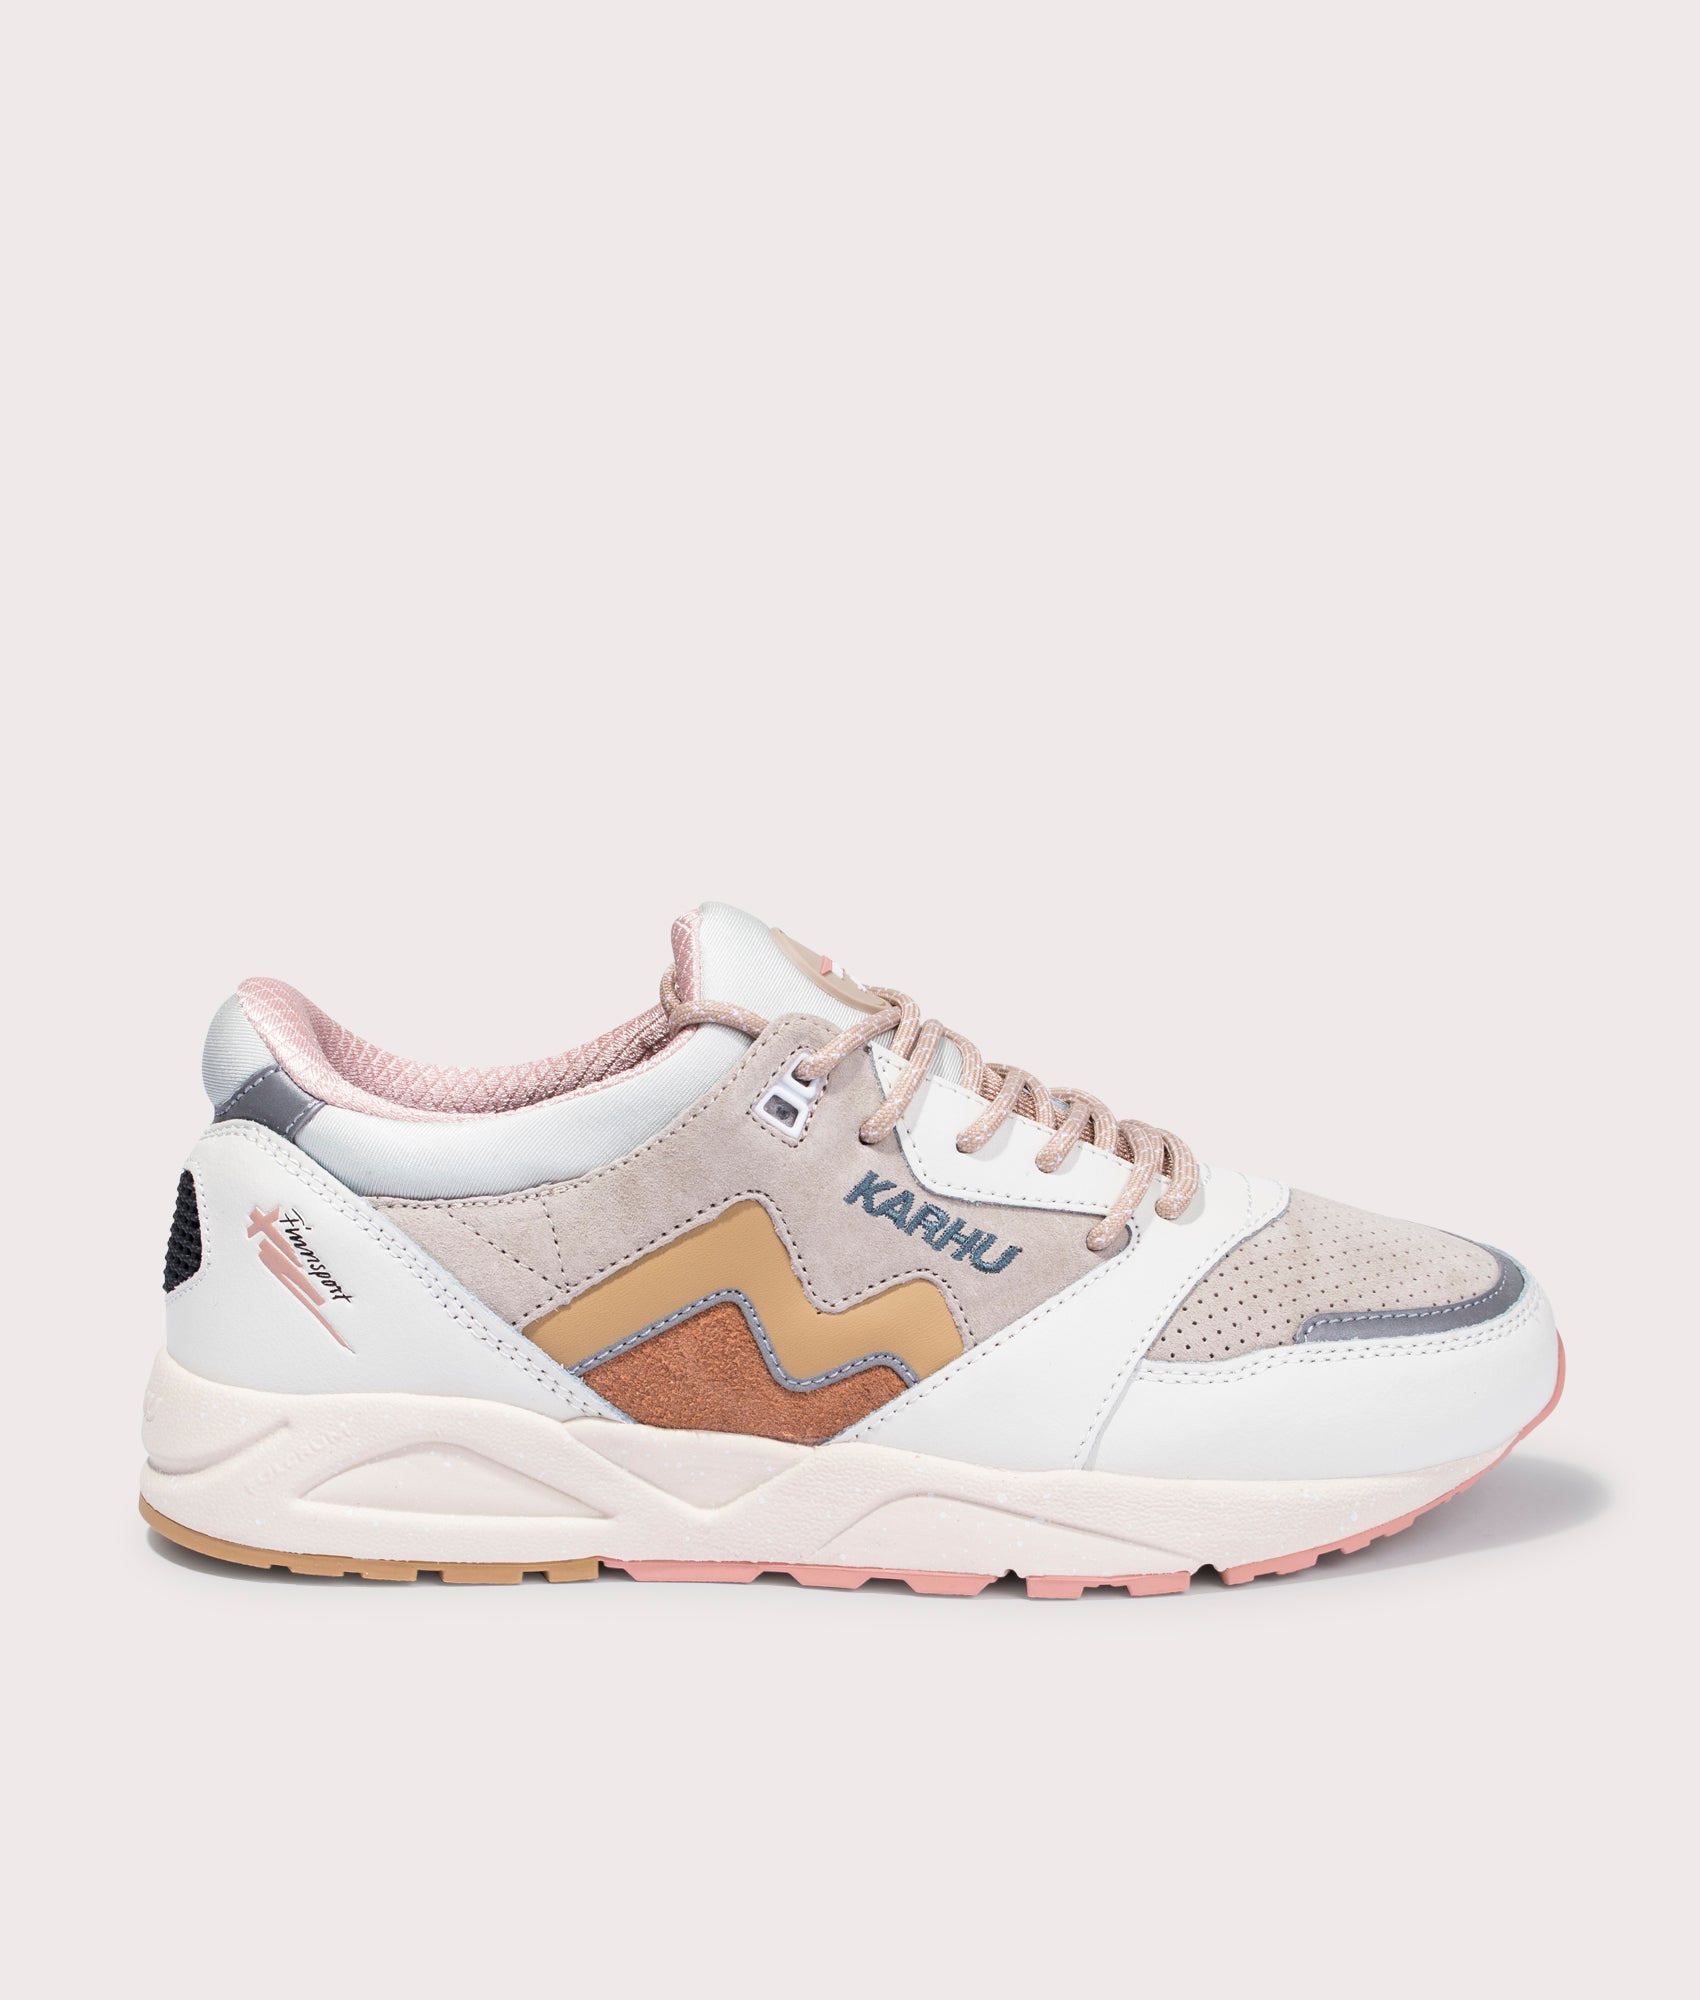 Karhu Mens Aria 95 Sneakers - Colour: Lilly White/Curry - Size: 9